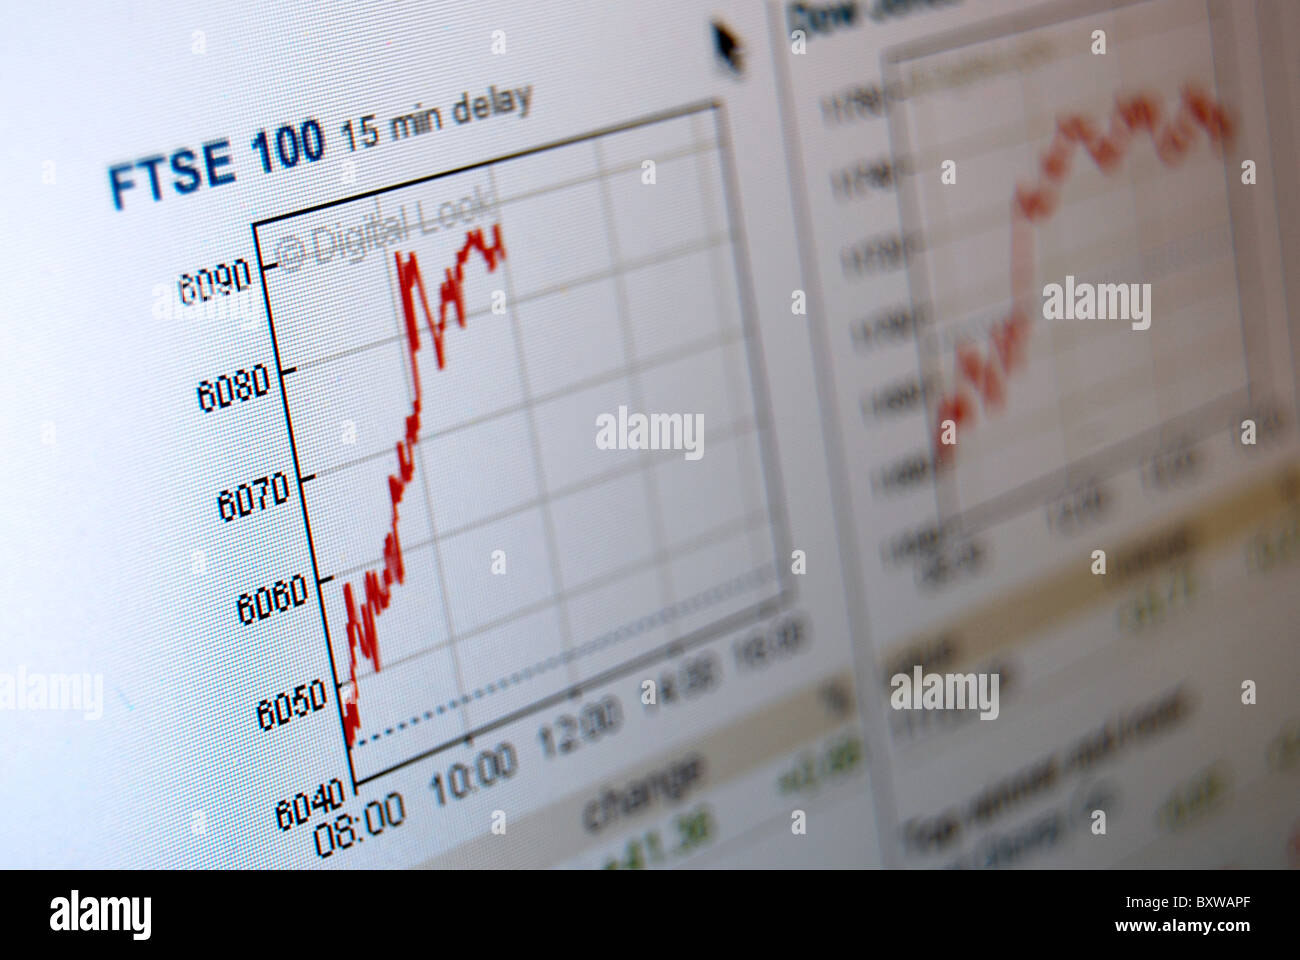 A photo illustration of the BBC news website showing FTSE 11 stocks Stock Photo